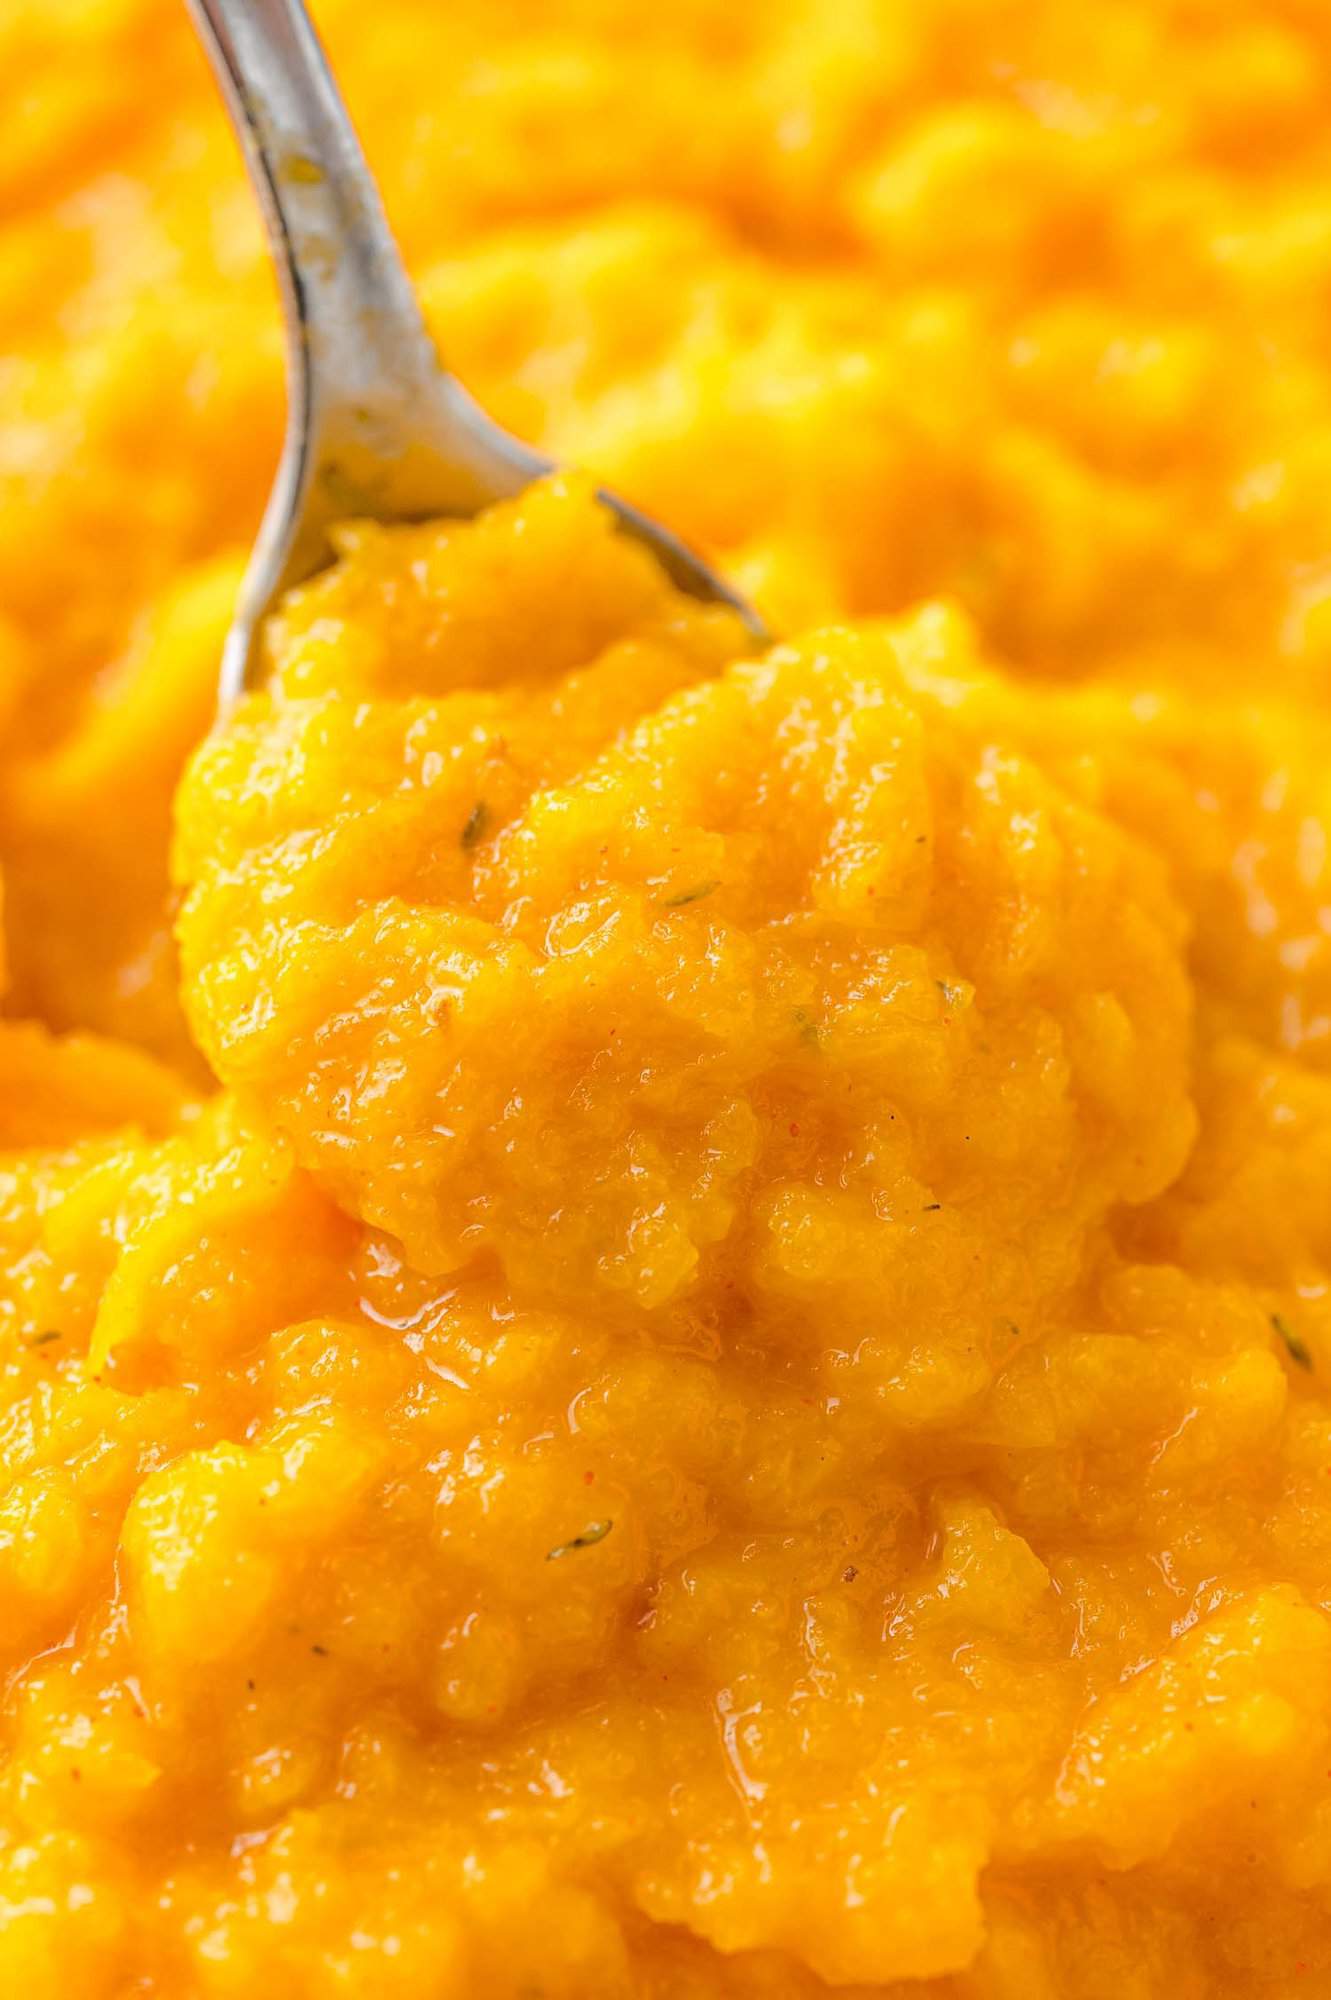 A spoon scooping through mashed butternut squash, close up view.